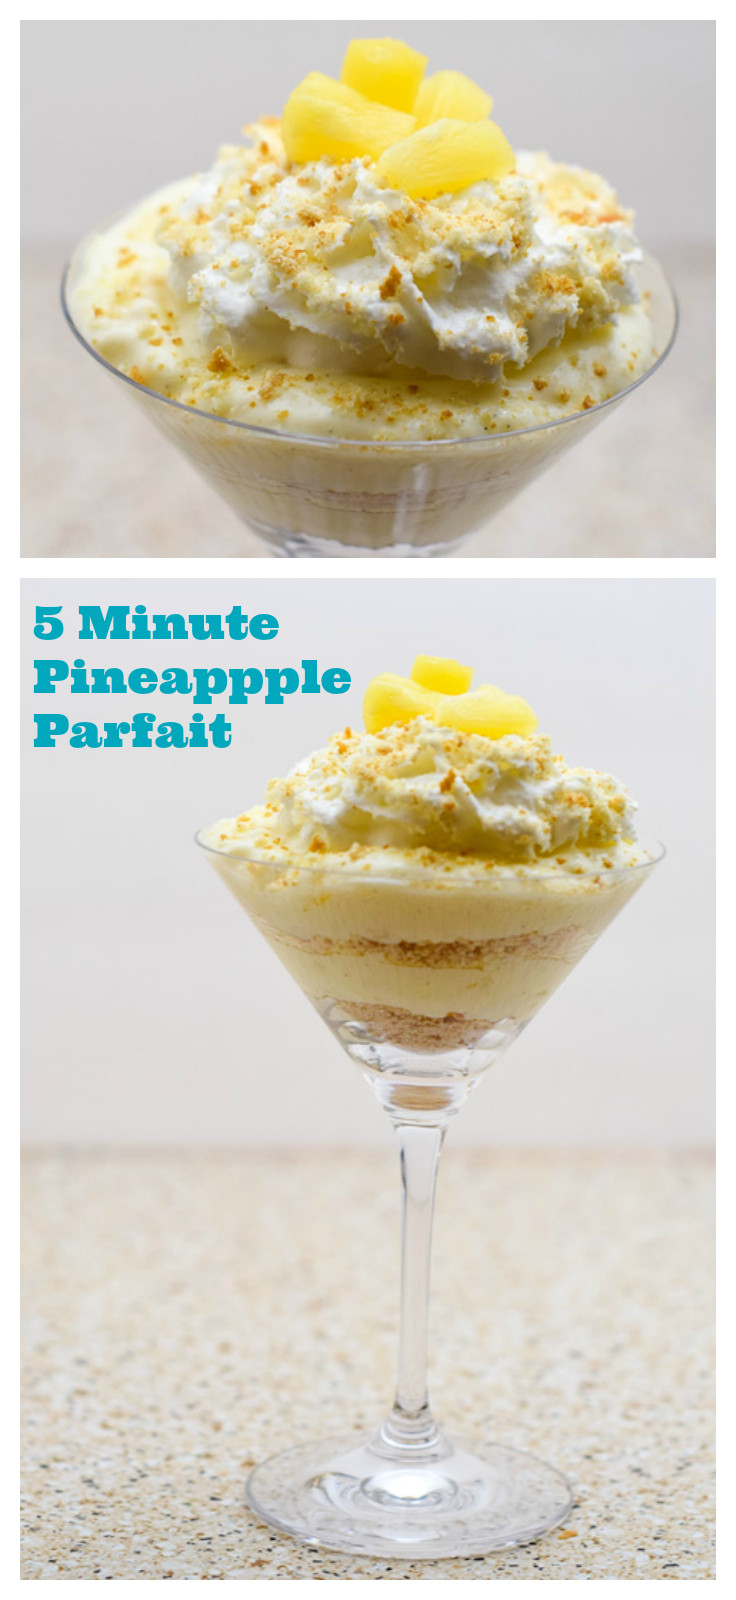 Healthy 5 Minute Desserts Best 20 Quick and Easy Dessert 5 Minute Pineapple Parfait Plus